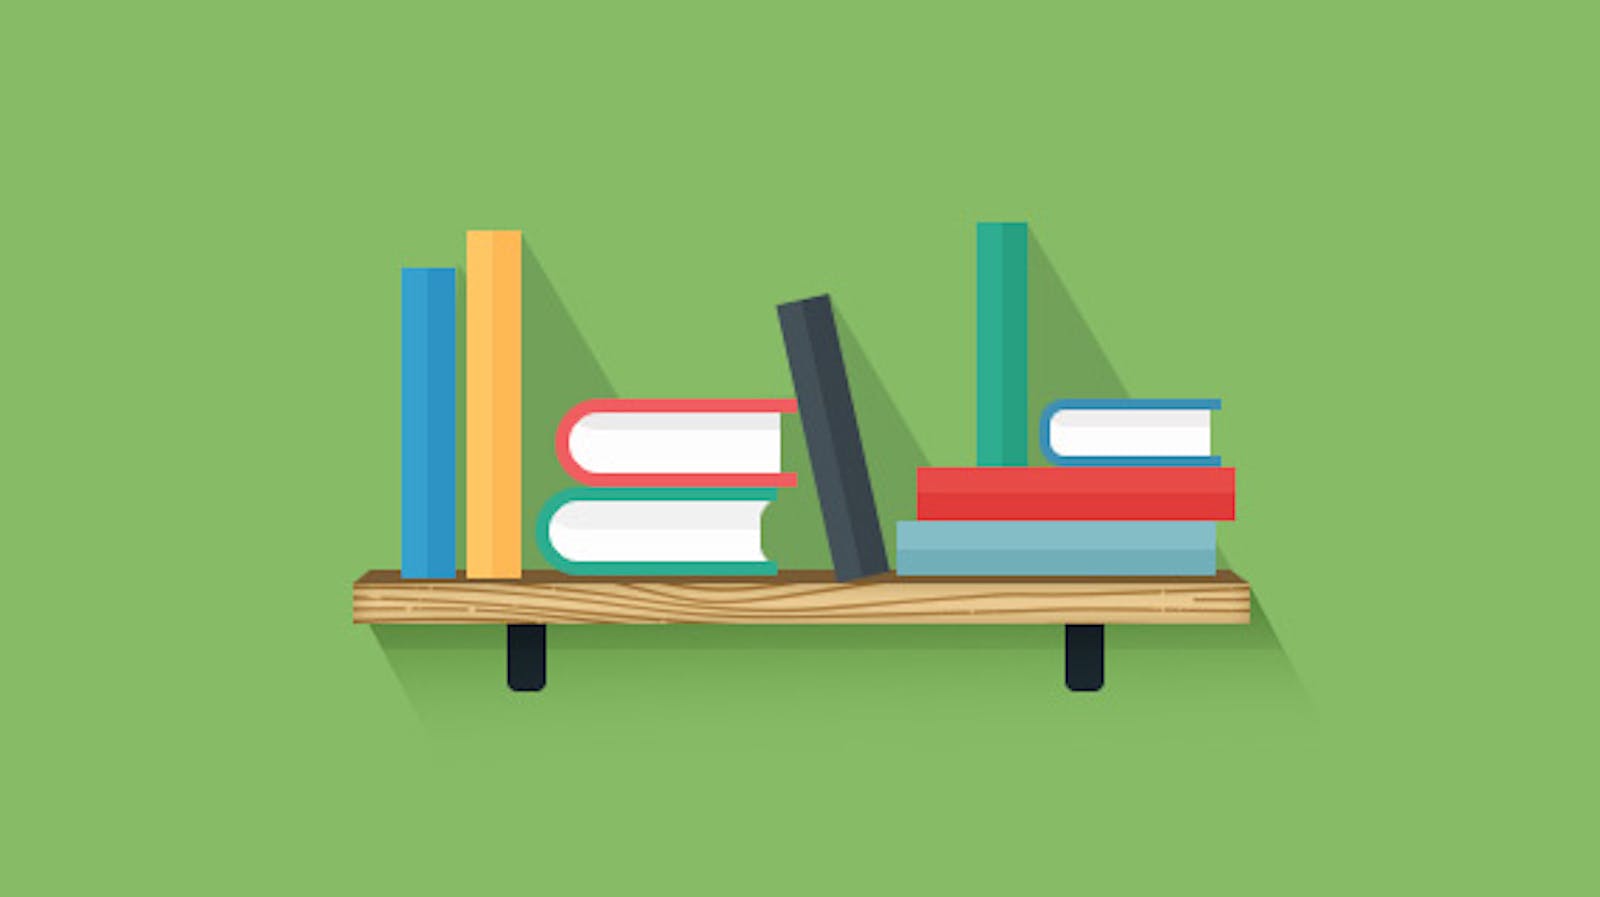 25 Underrated Books on Persuasion, Influence, and Understanding Human Behavior - Help Scout